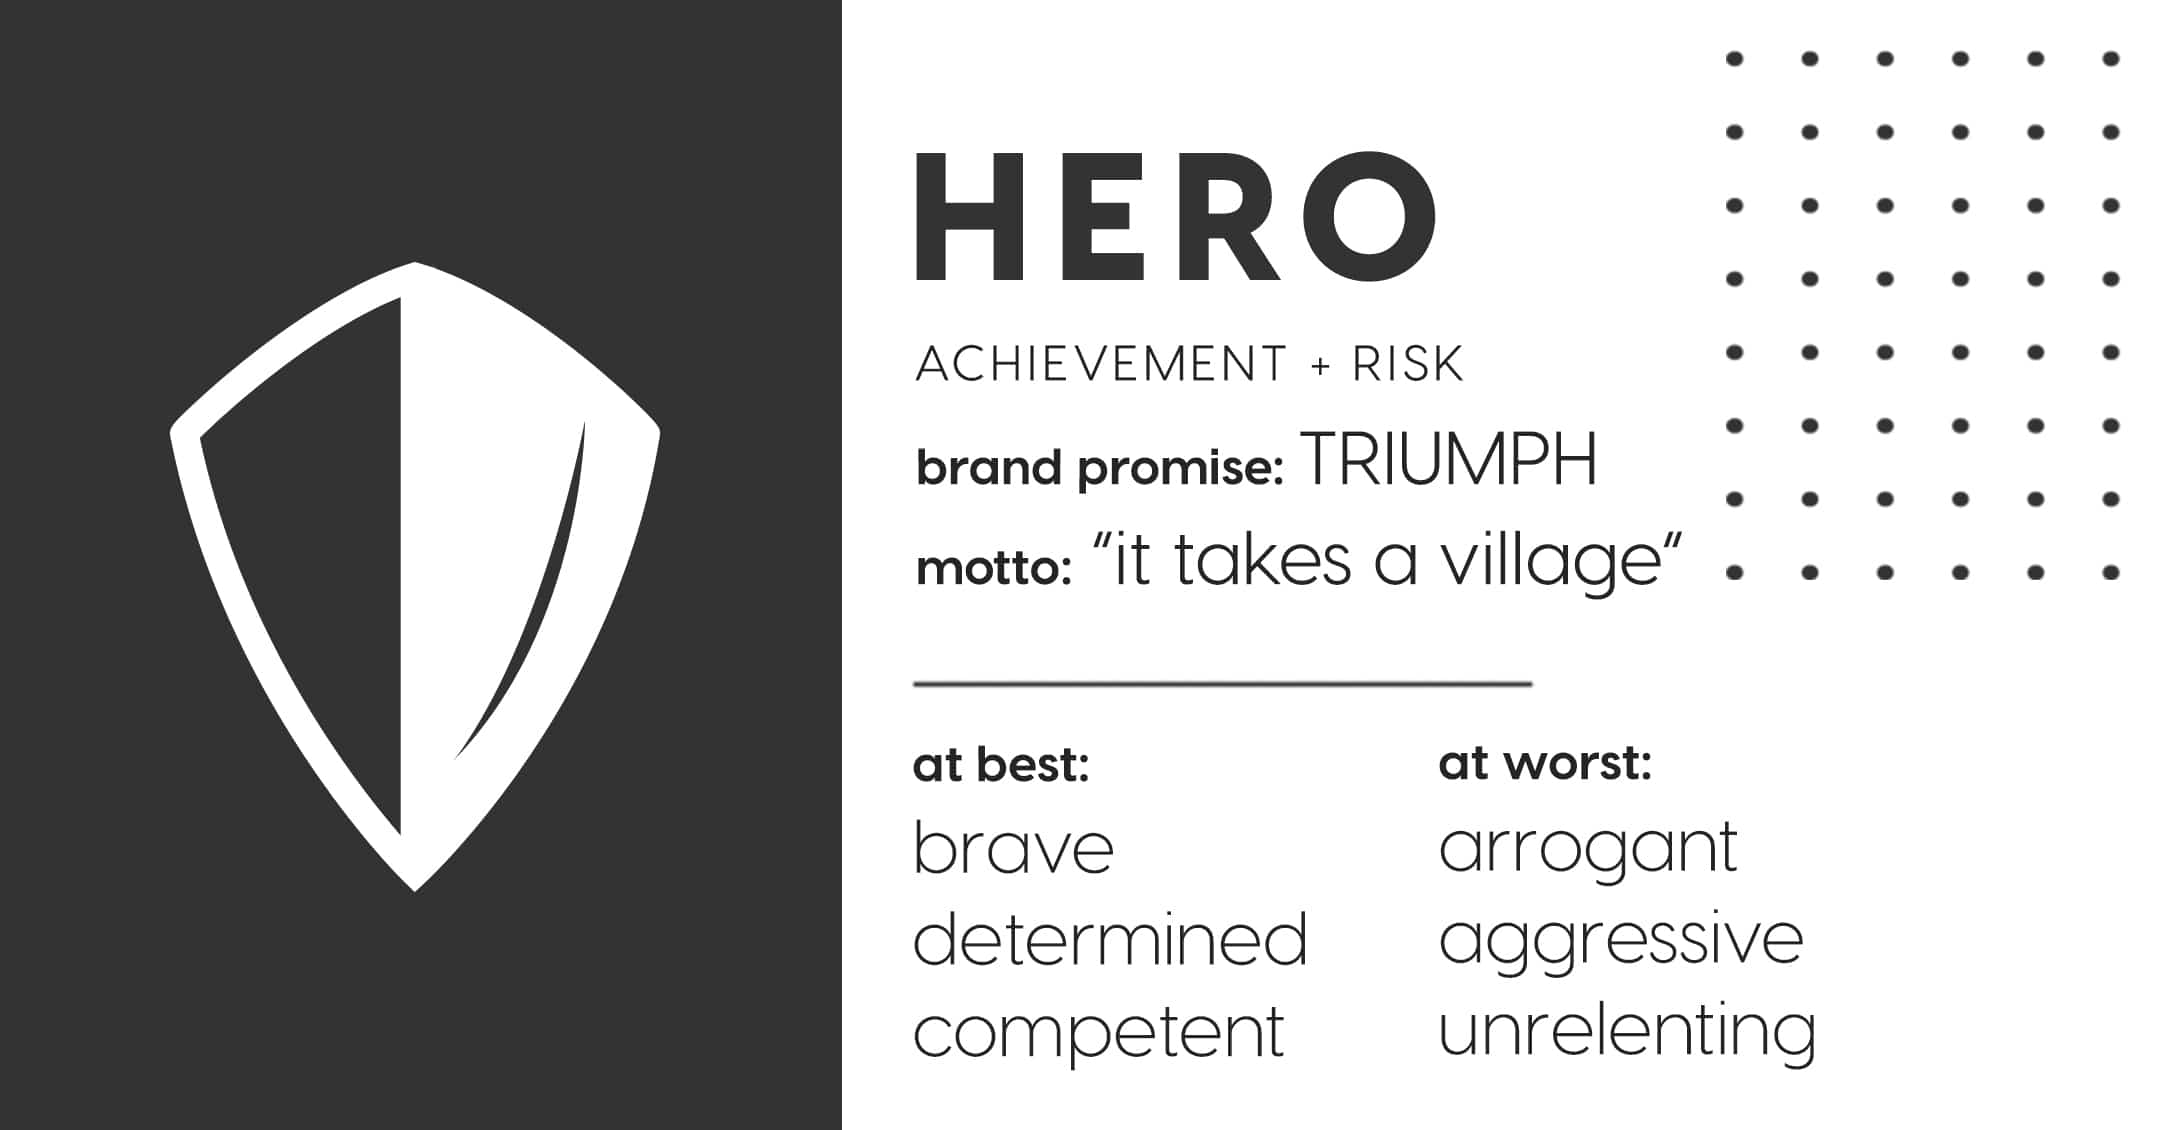 what are examples of heroic behavior